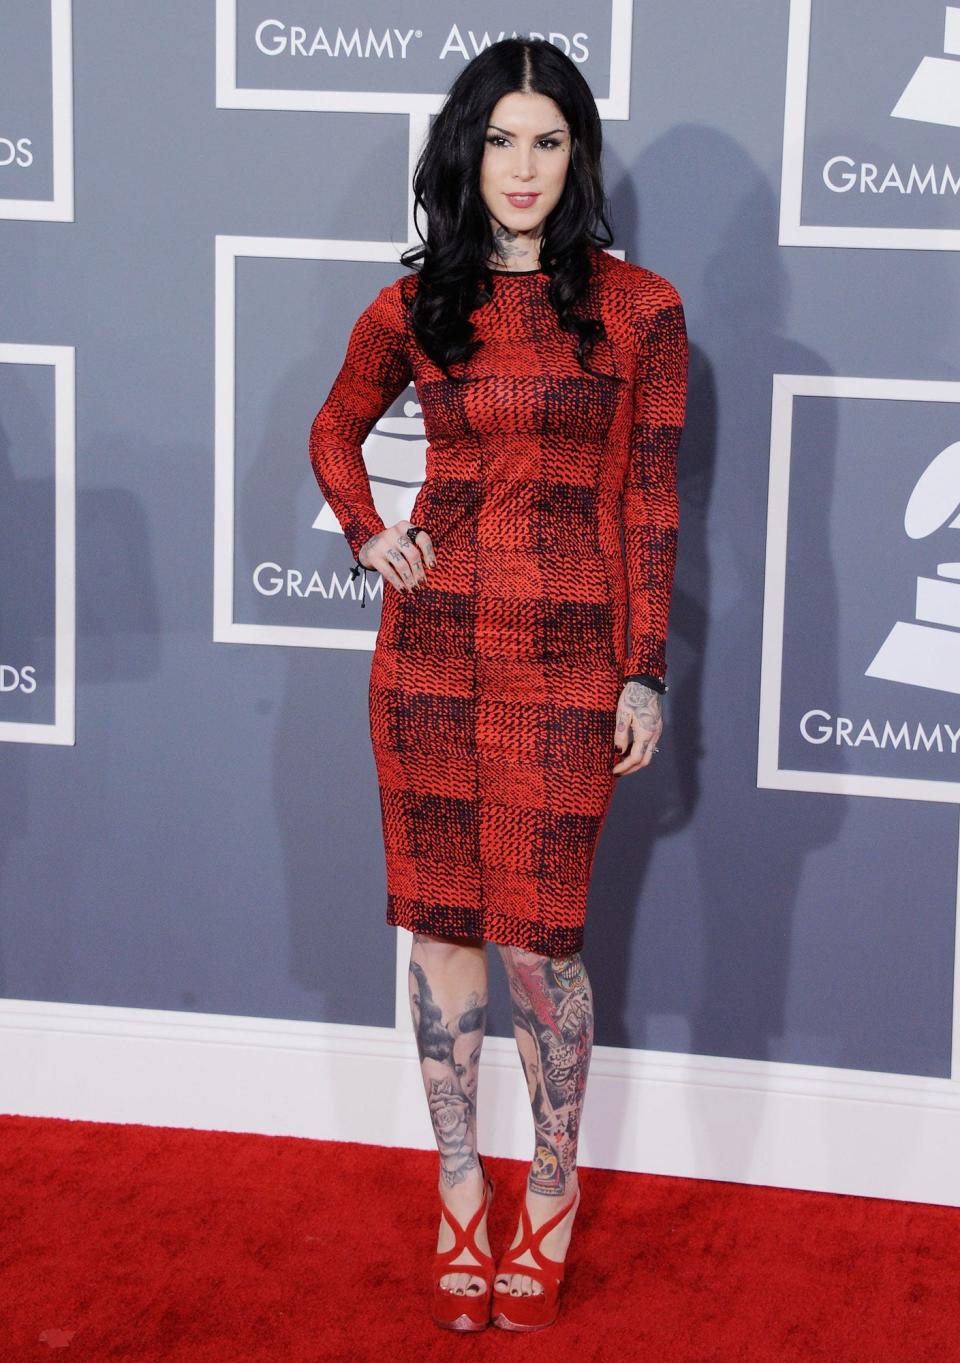 Kat Von D attends the Grammy Awards in California on February 10, 2013.